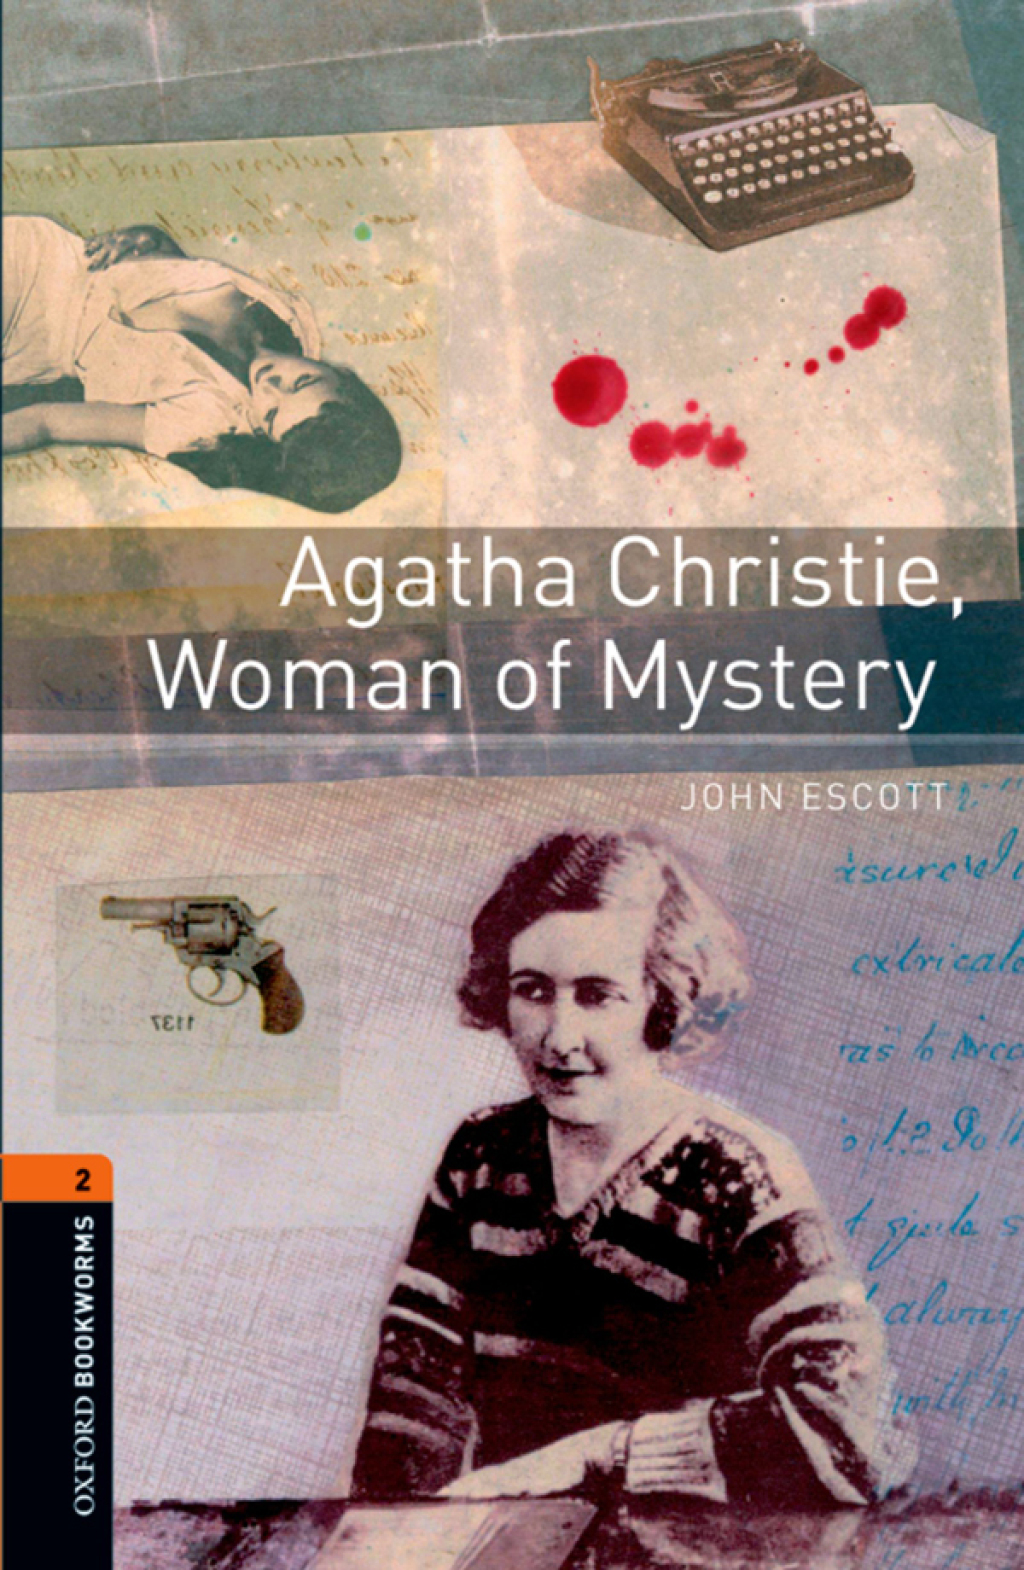 Agatha Christie  Woman of Mystery Level 2 Oxford Bookworms Library - 3rd Edition (eBook Rental)